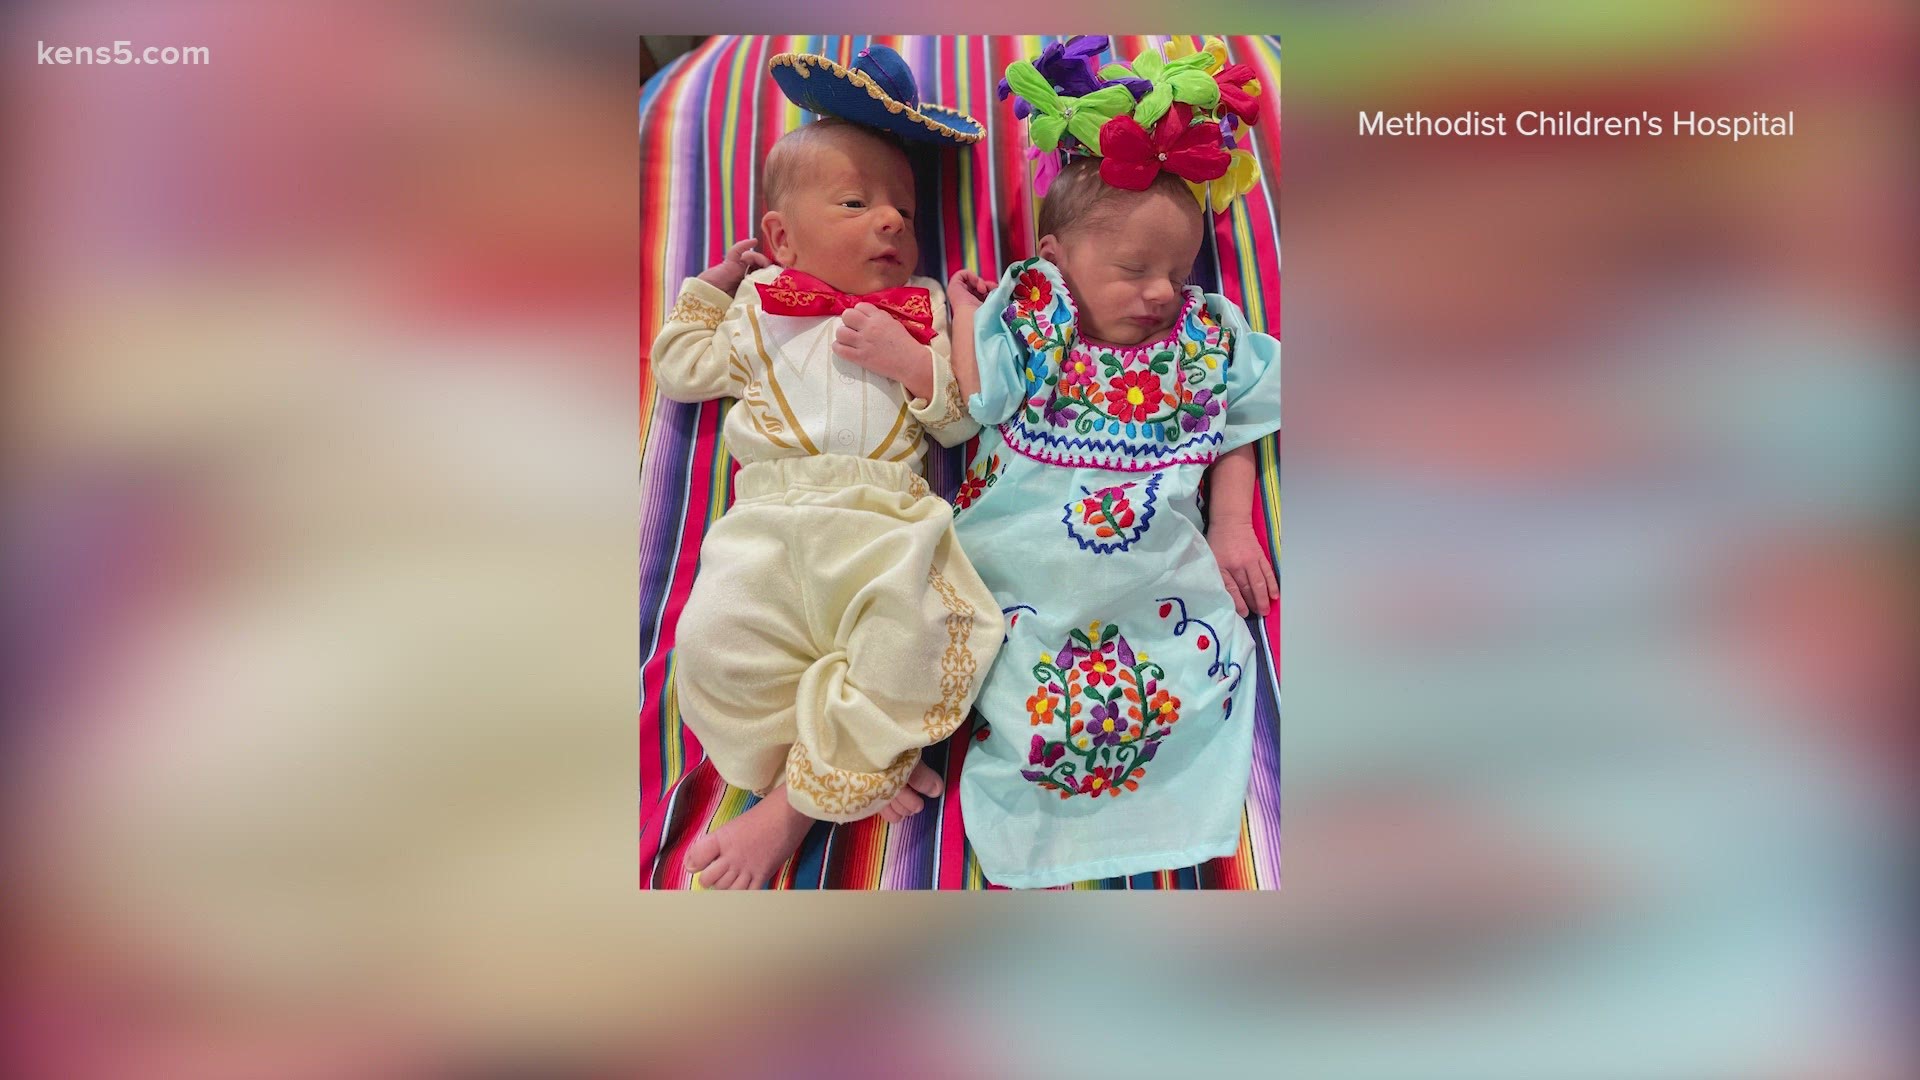 The sweet little duo was born at Methodist Children's Hospital right before Fiesta kicks off in the Alamo City.